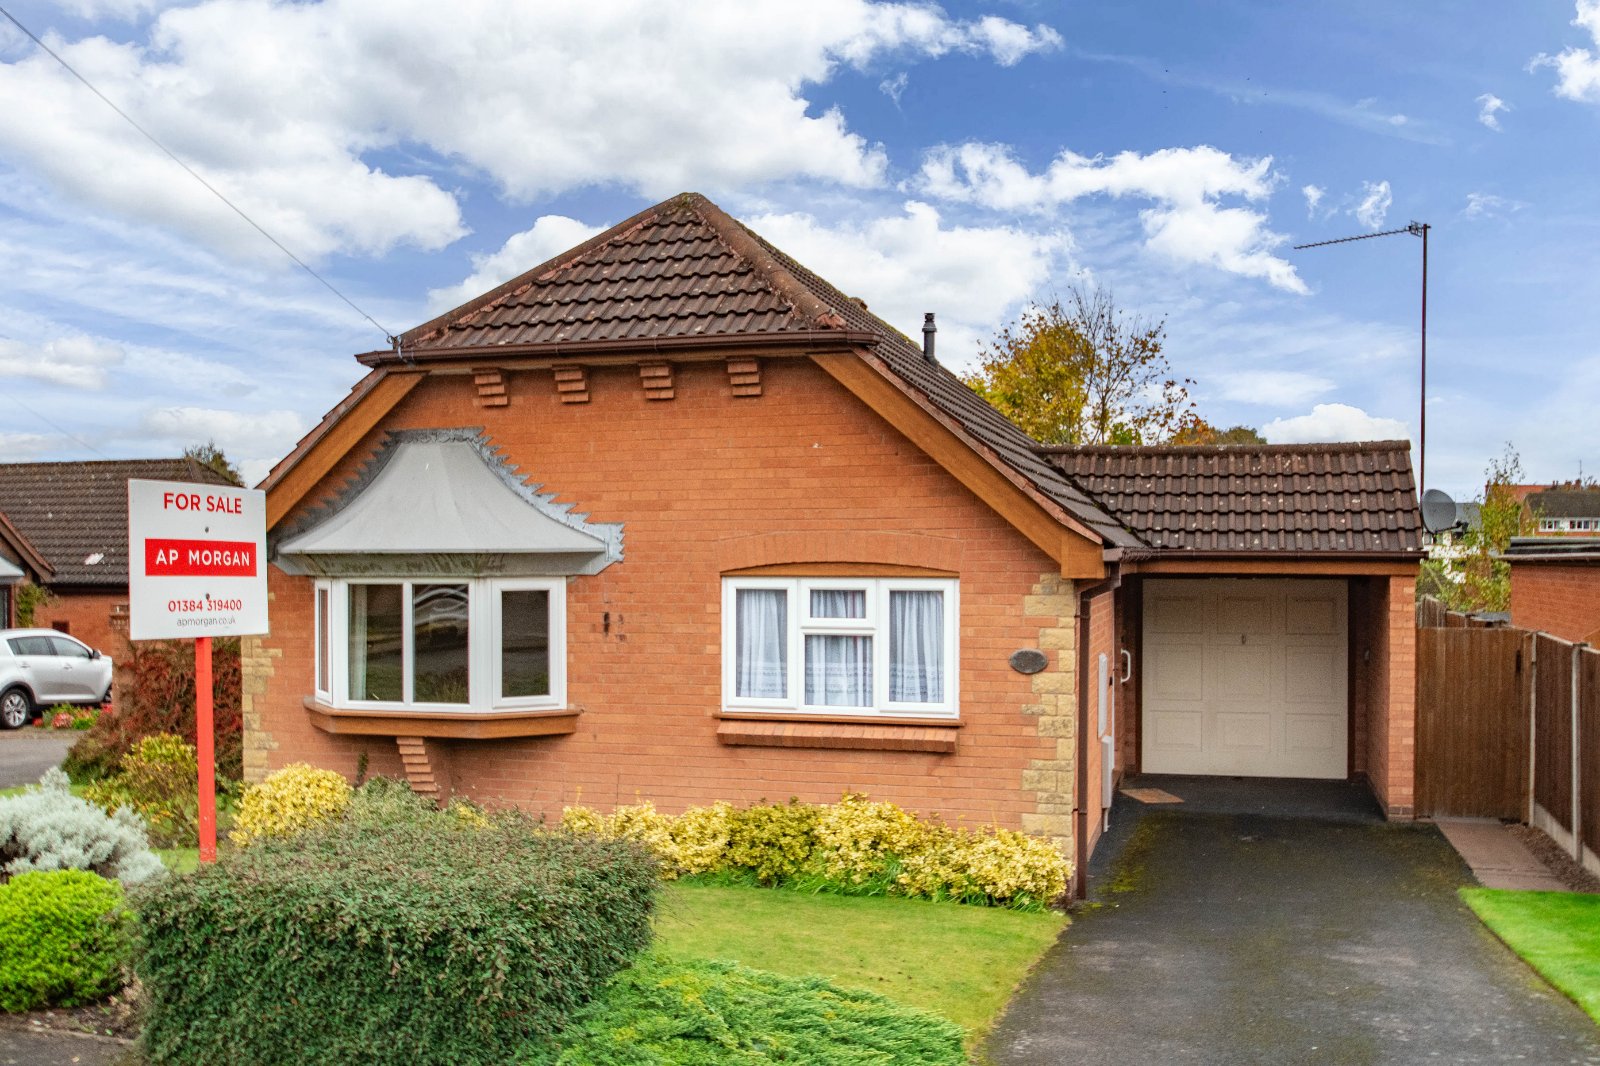 2 bed bungalow for sale in Morning Pines, Stourbridge  - Property Image 1